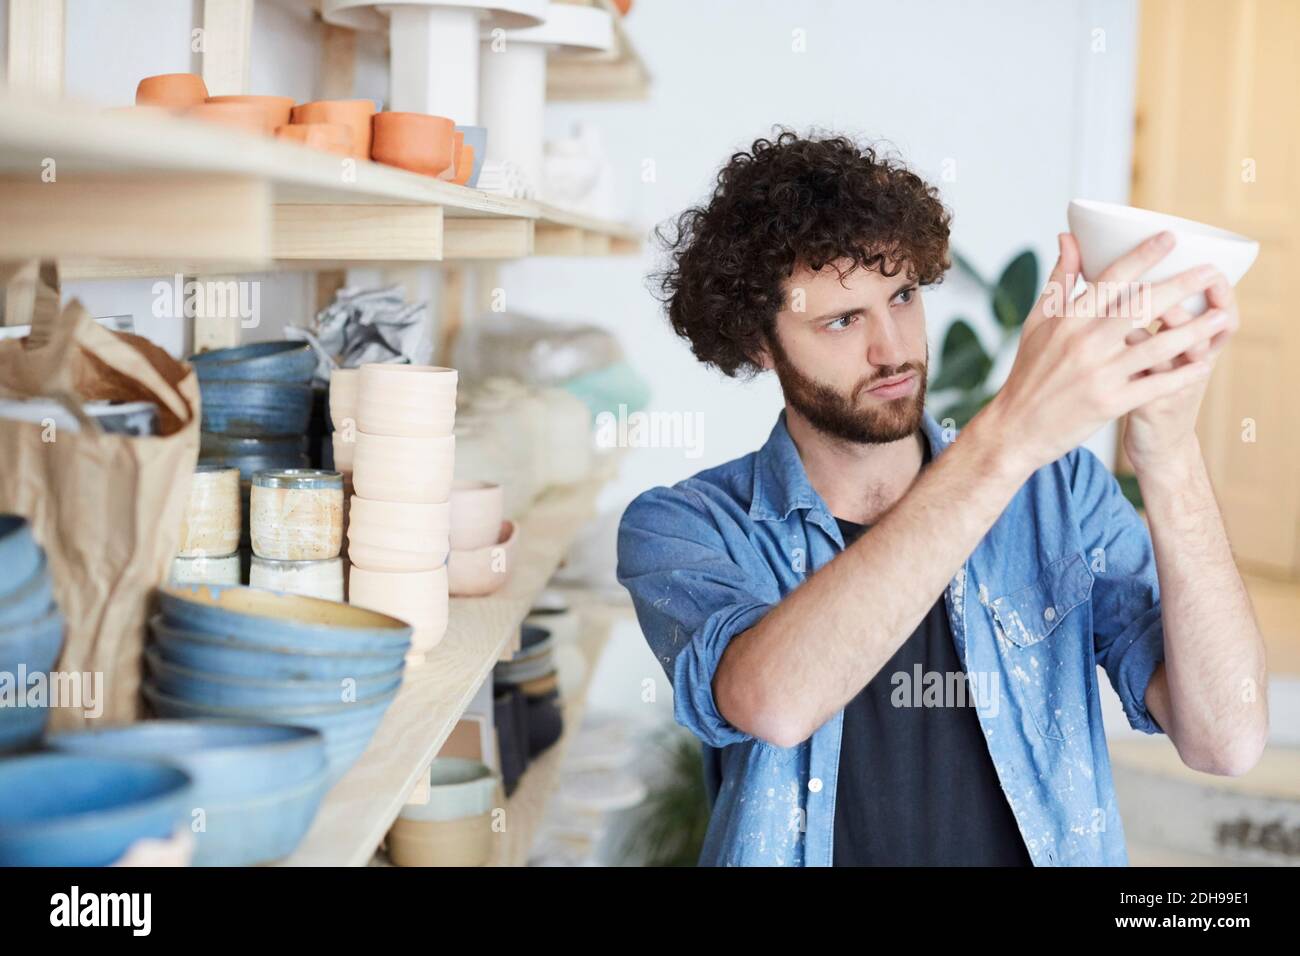 Mid adult man examining bowl in pottery class Stock Photo